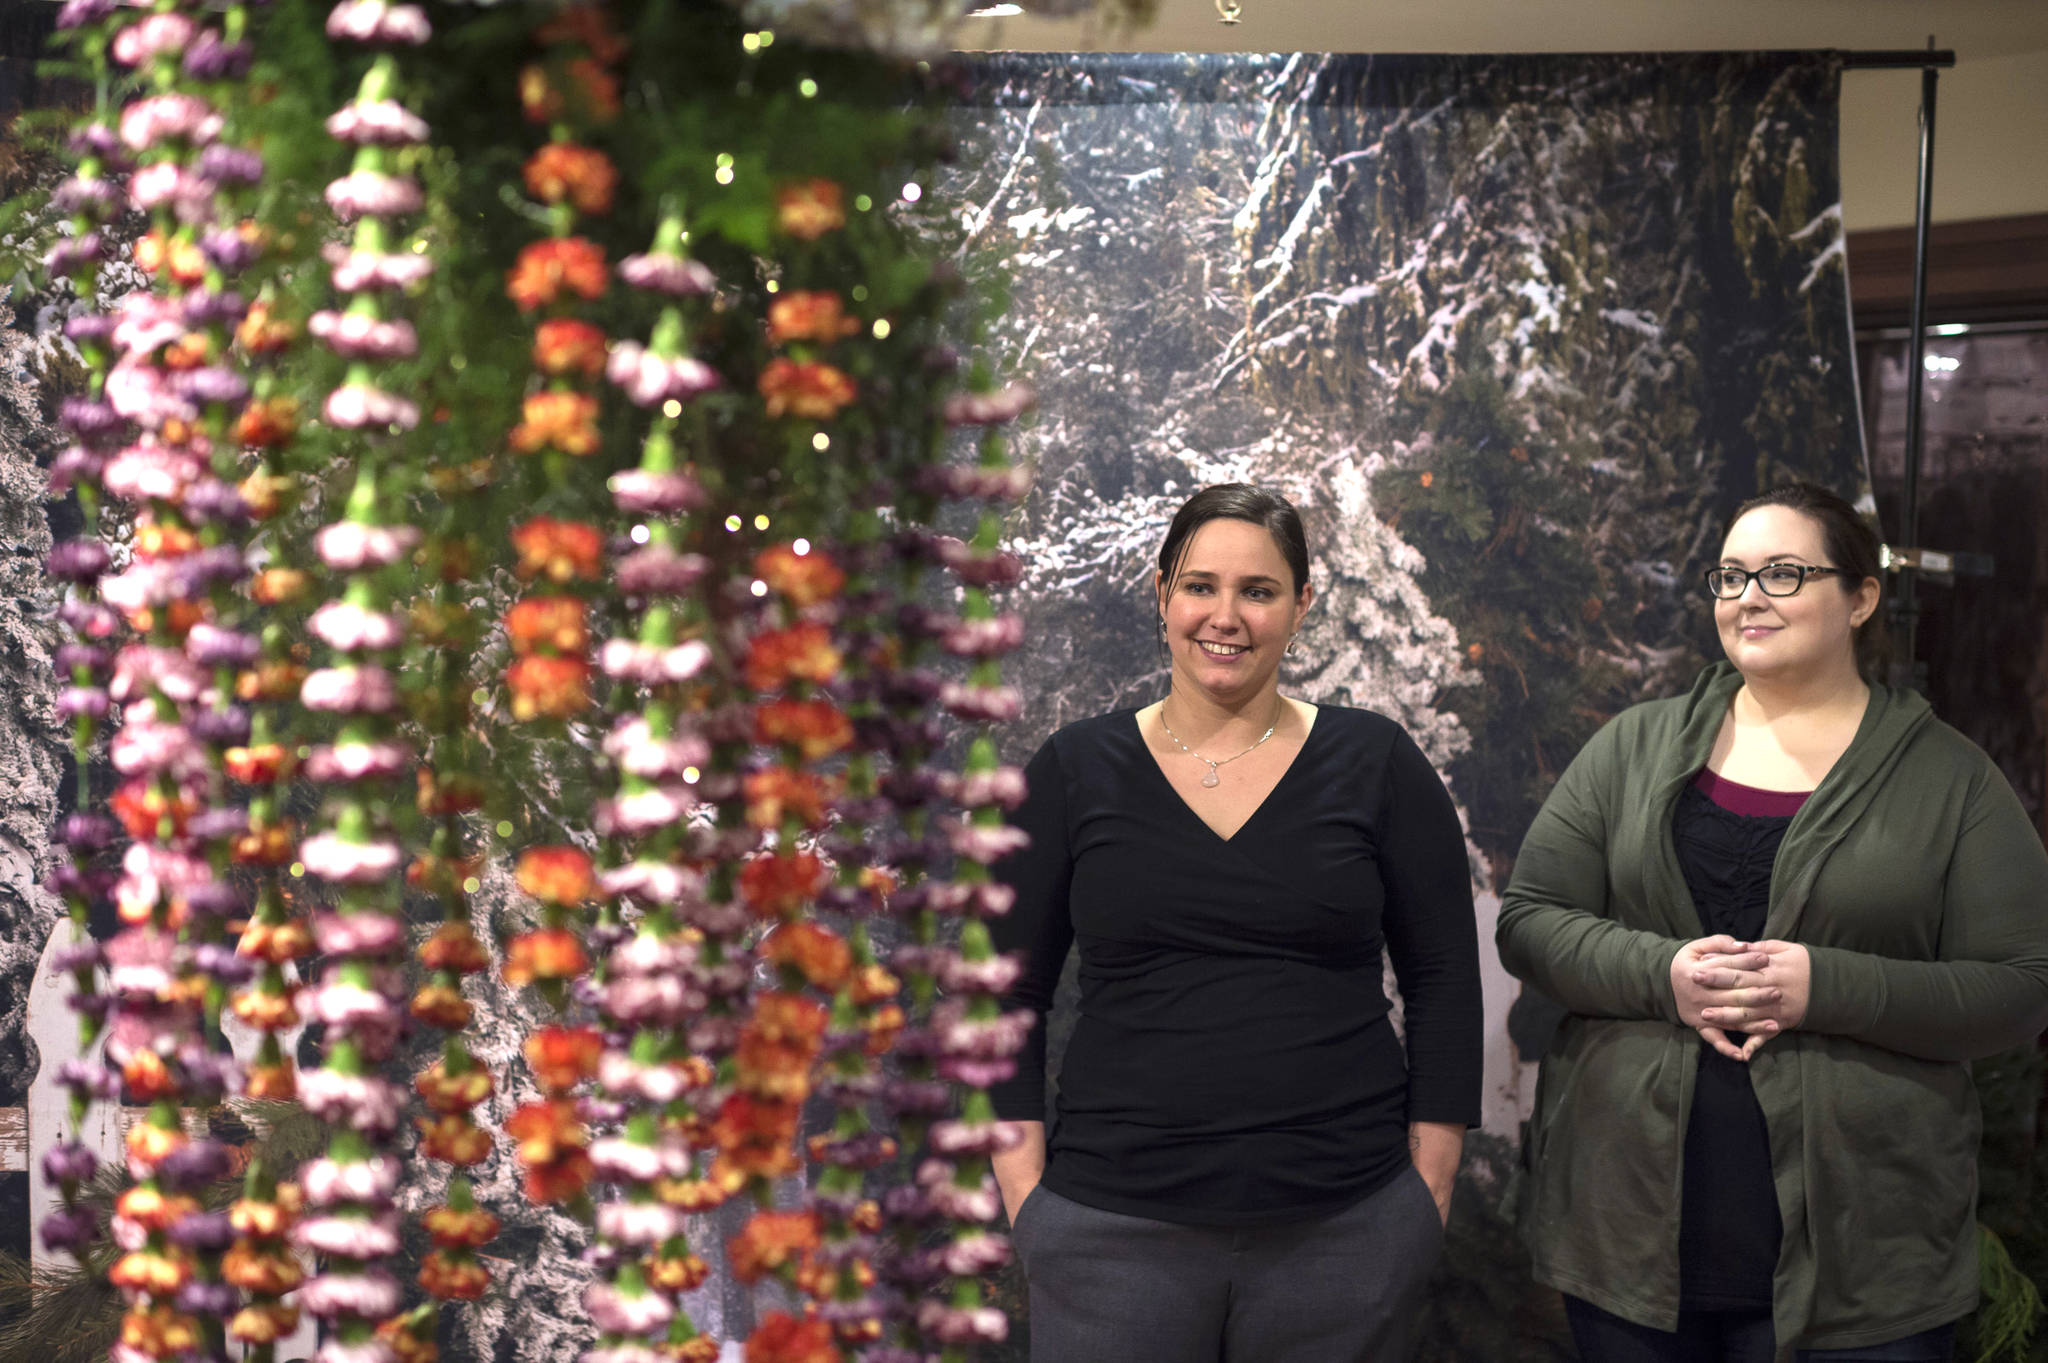 Kimberlee Wear, owner of Captive Moments Alaska, right, and Debrah Clements, owner of Martha’s Flowers, admire Clements’ hanging flower display in the Senate Building during Gallery Walk on Friday, Dec. 7, 2018. (Michael Penn | Juneau Empire)